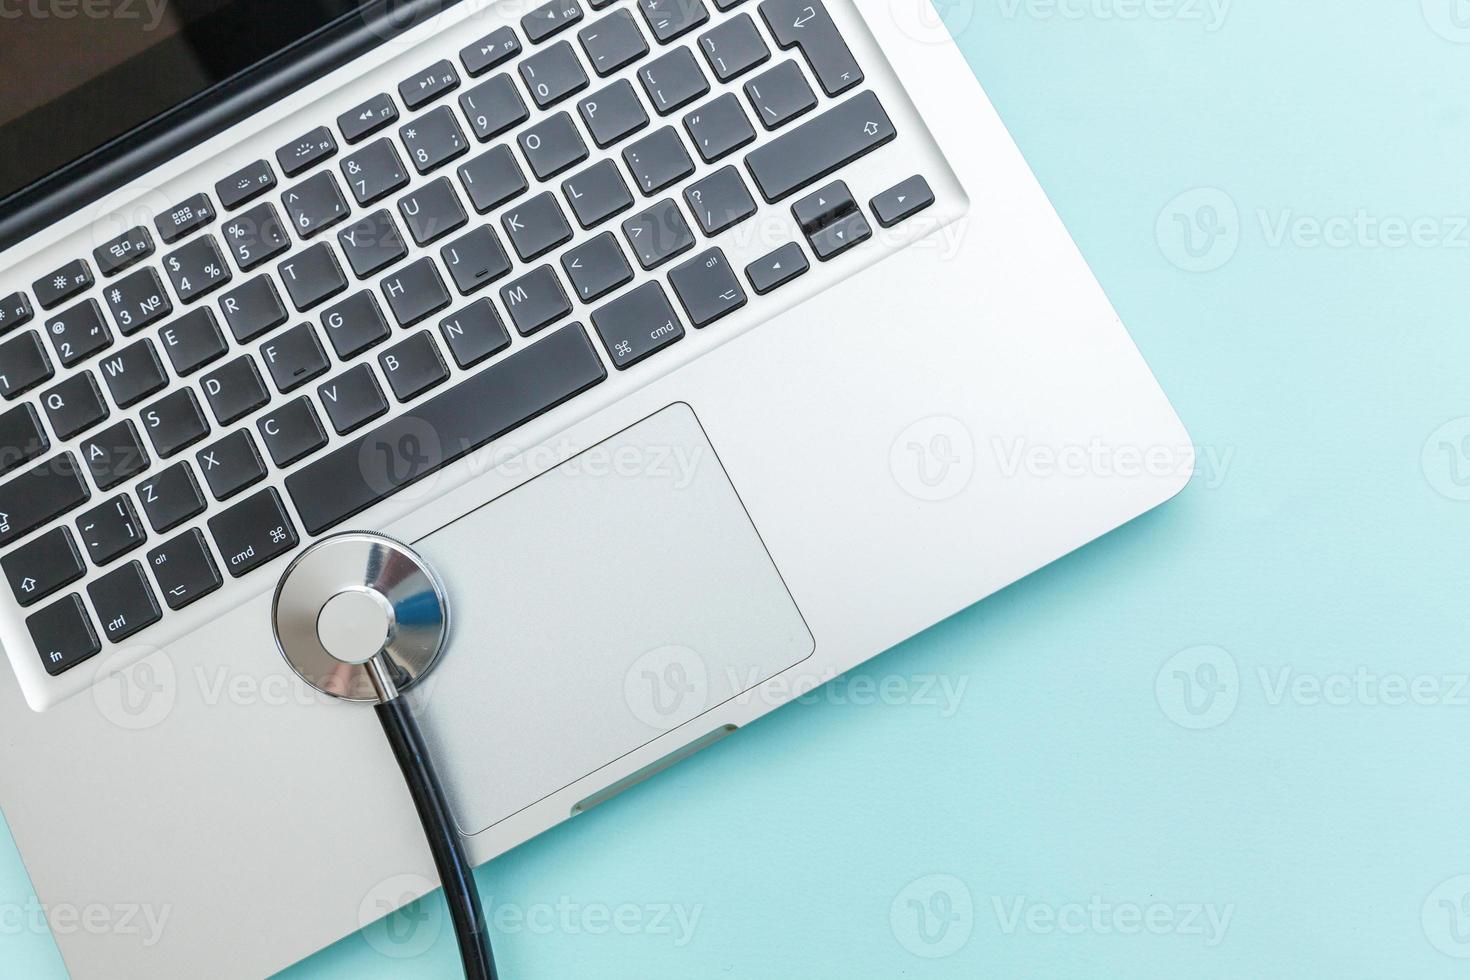 Stethoscope keyboard laptop computer isolated on blue background. Modern medical Information technology and sofware advances concept. Computer and gadget diagnostics and repair photo